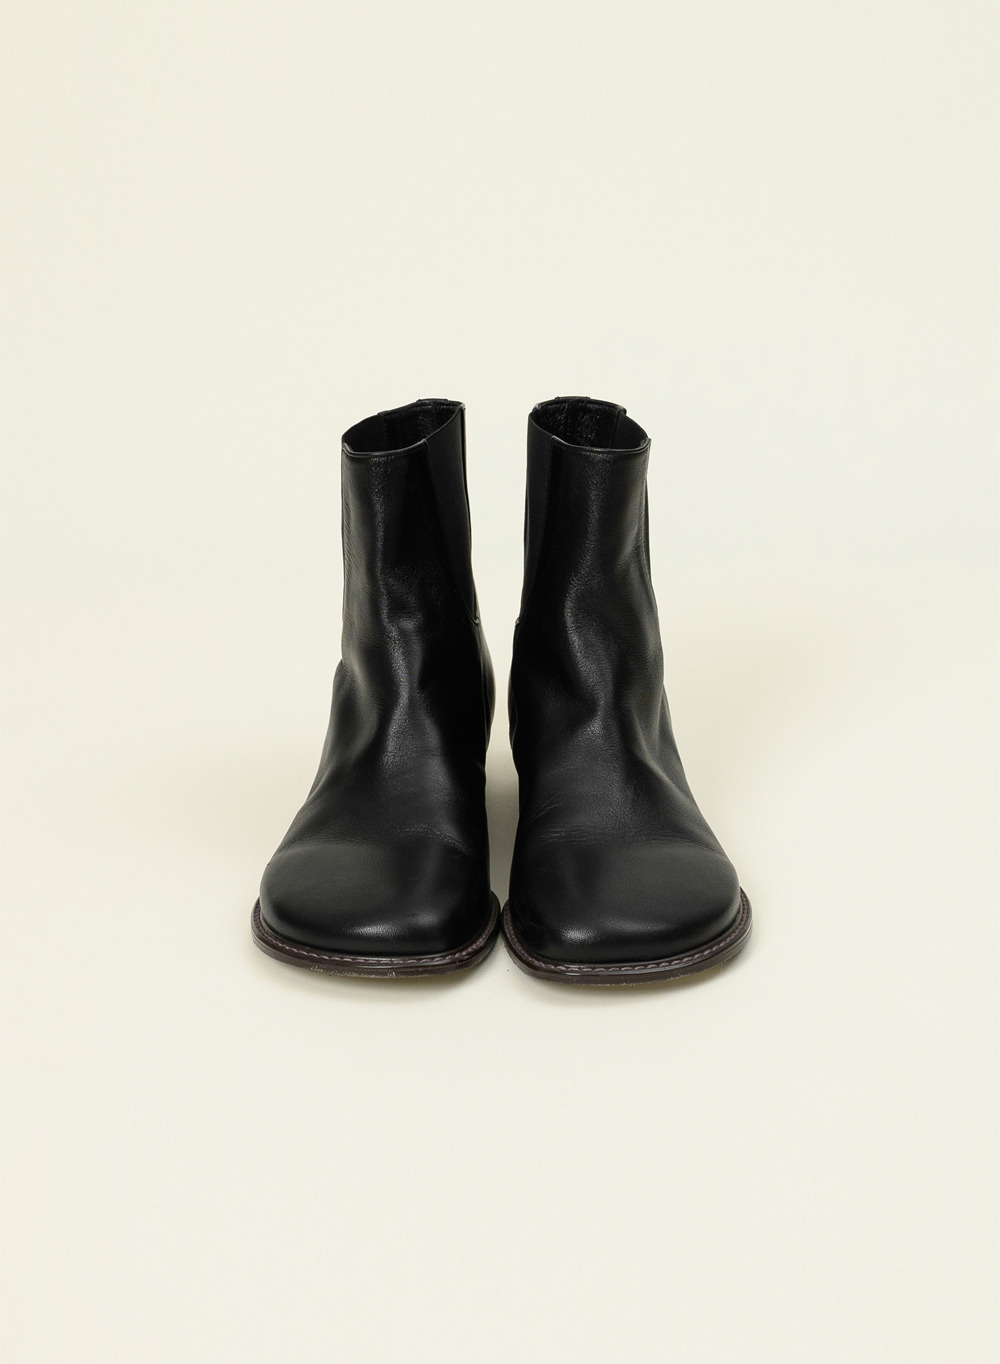 Balloon Ankle Boots Black